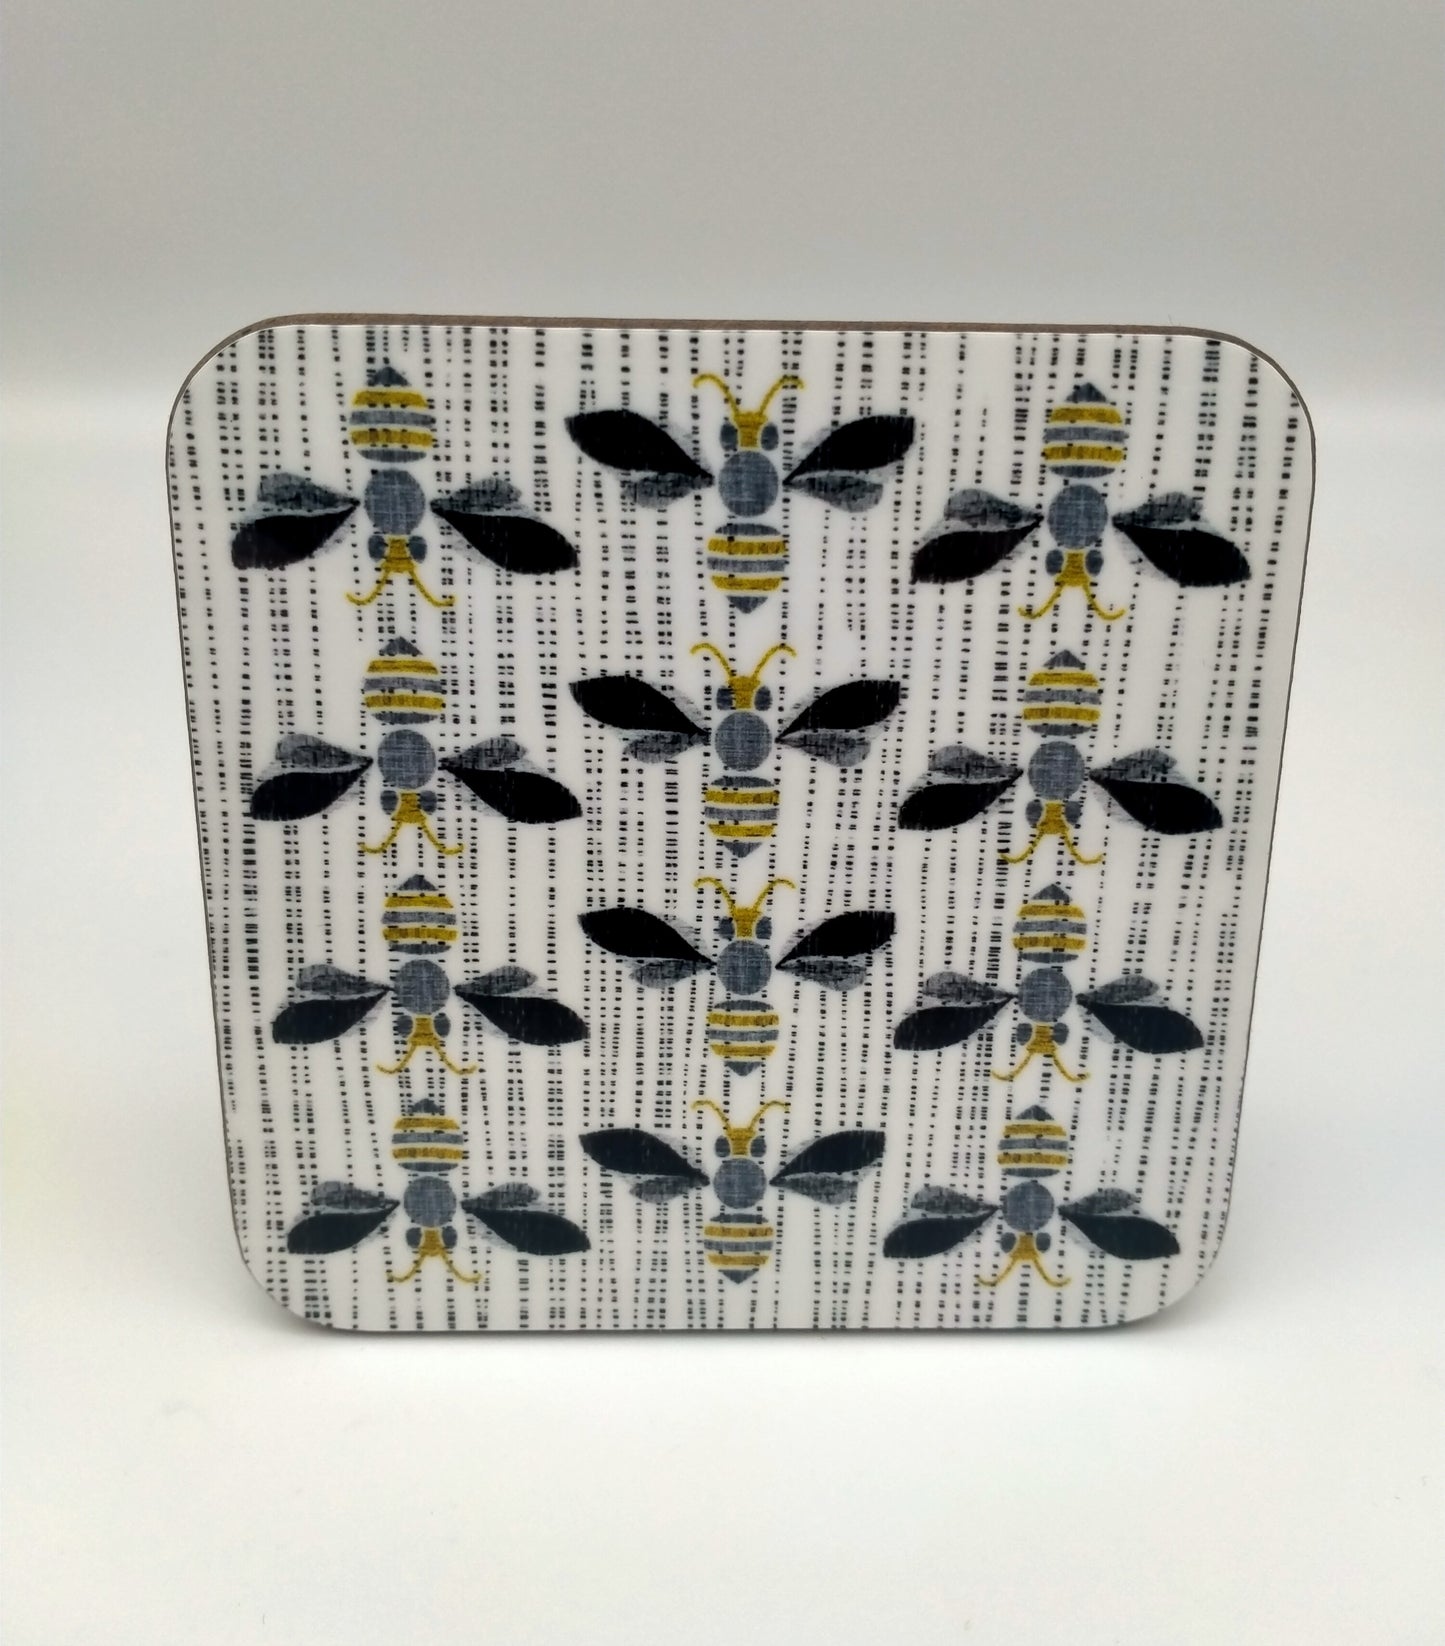 Square coaster with design of bees in three rows. Grey, black, gold tones.